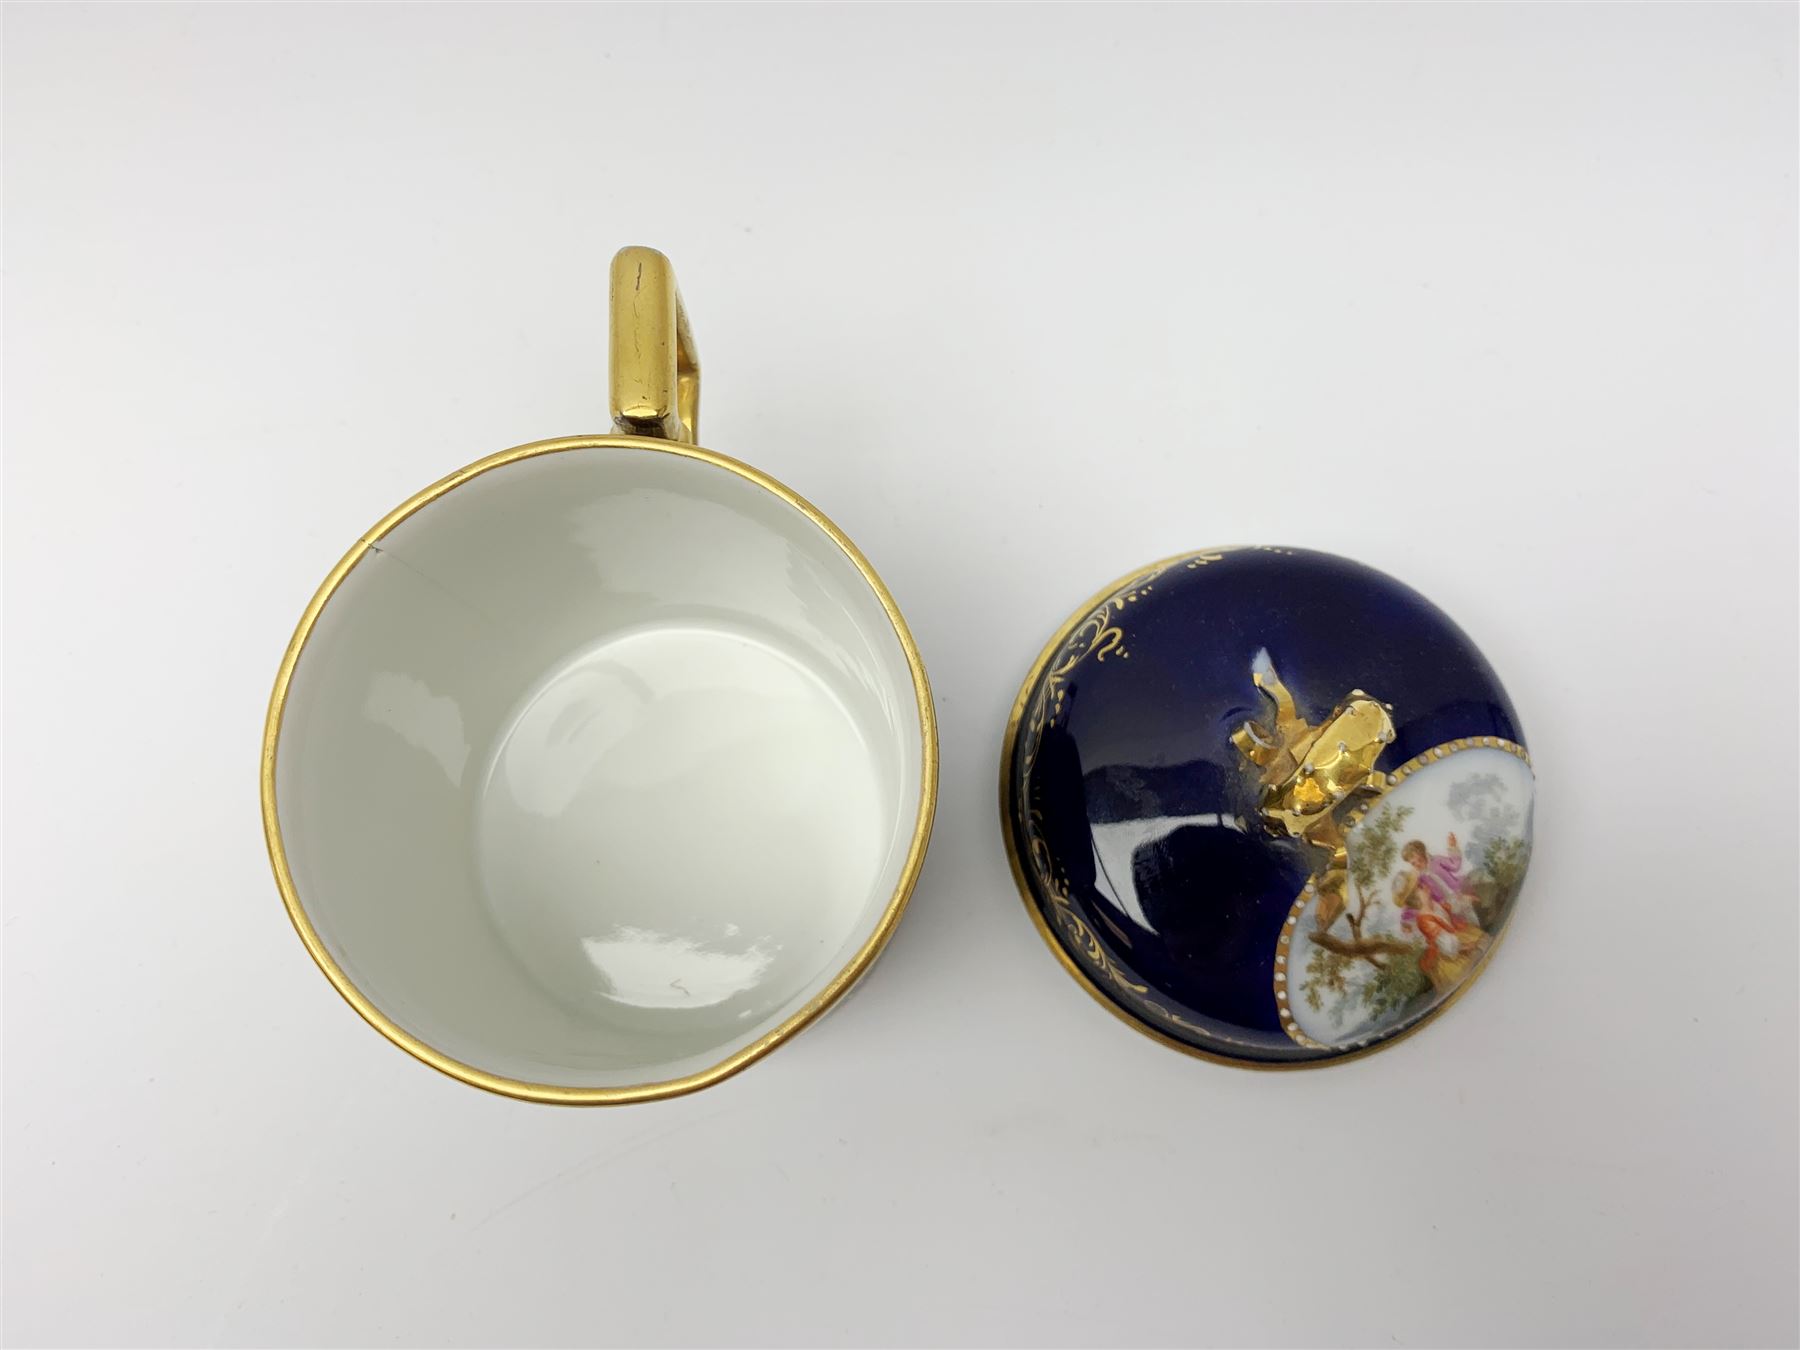 Berlin cabinet chocolate cup and saucer - Image 11 of 11